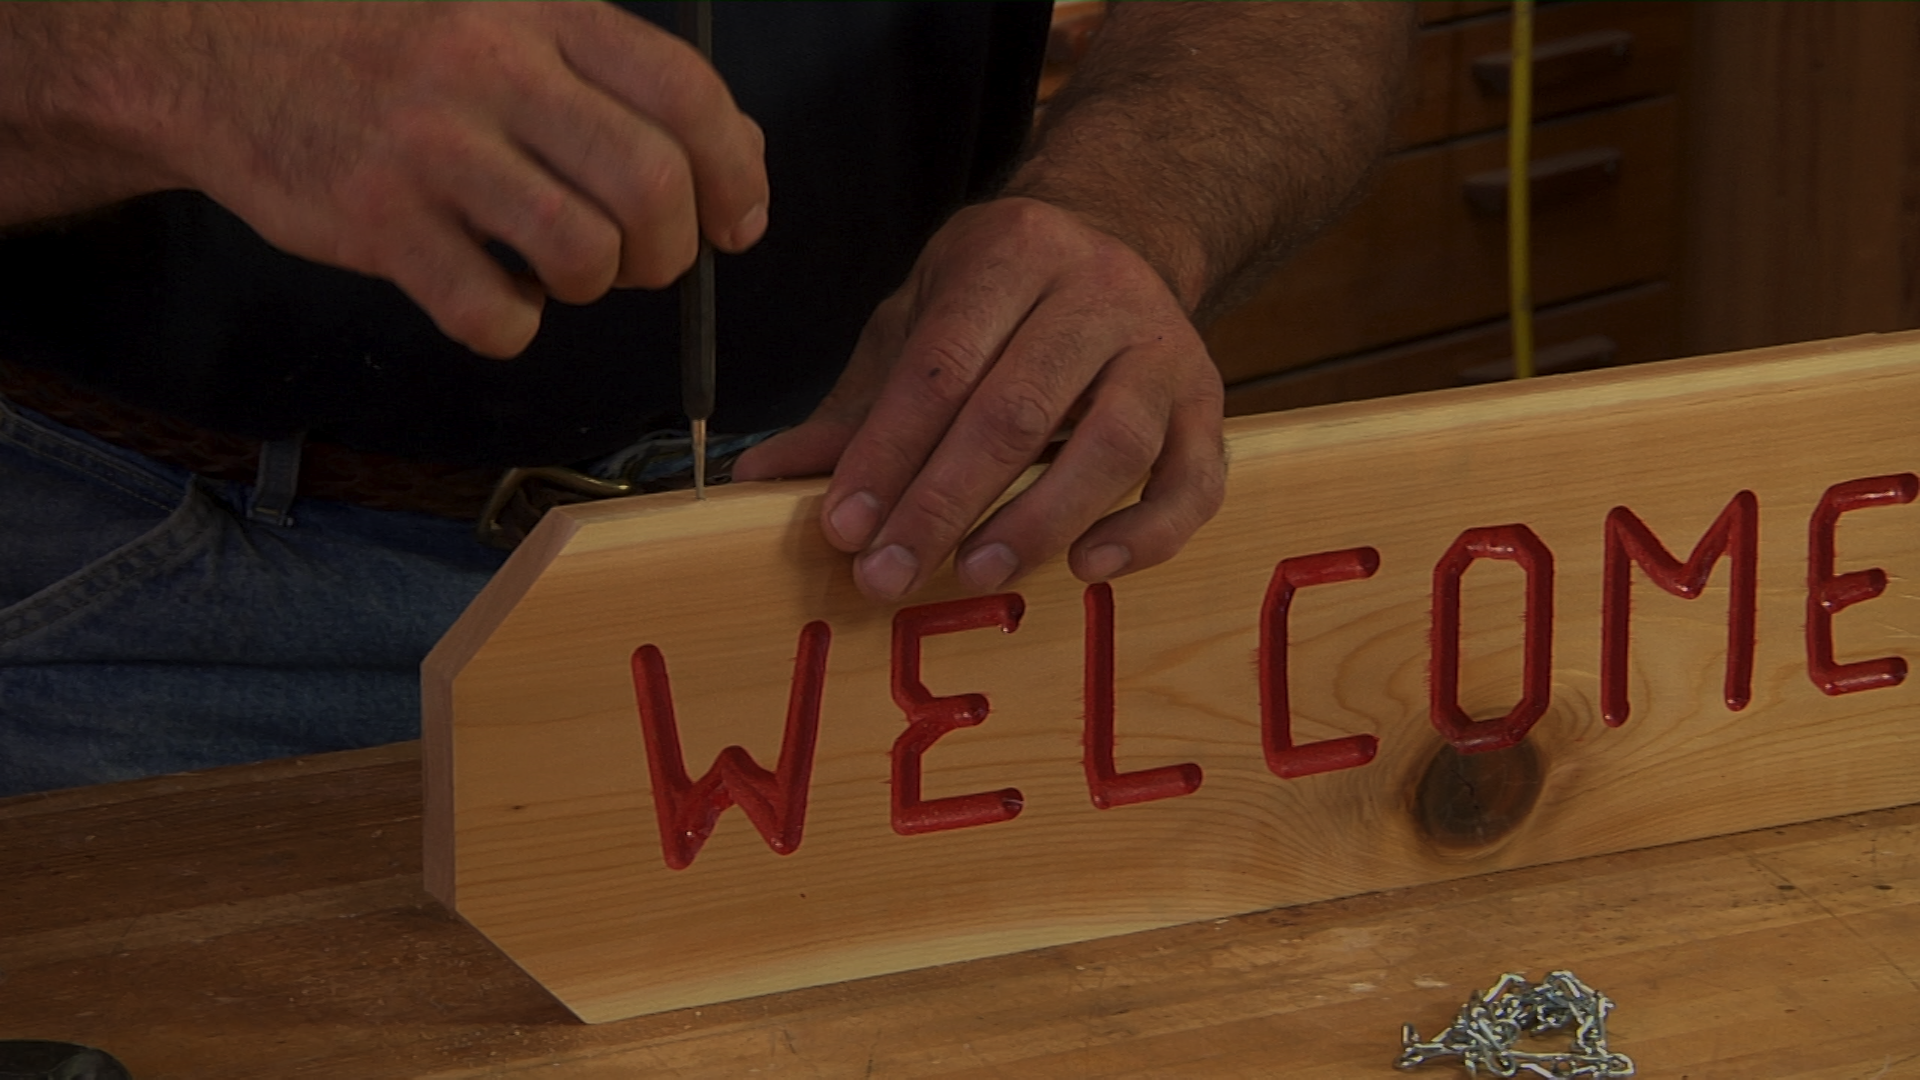 Putting a screw into a wooden welcome sign